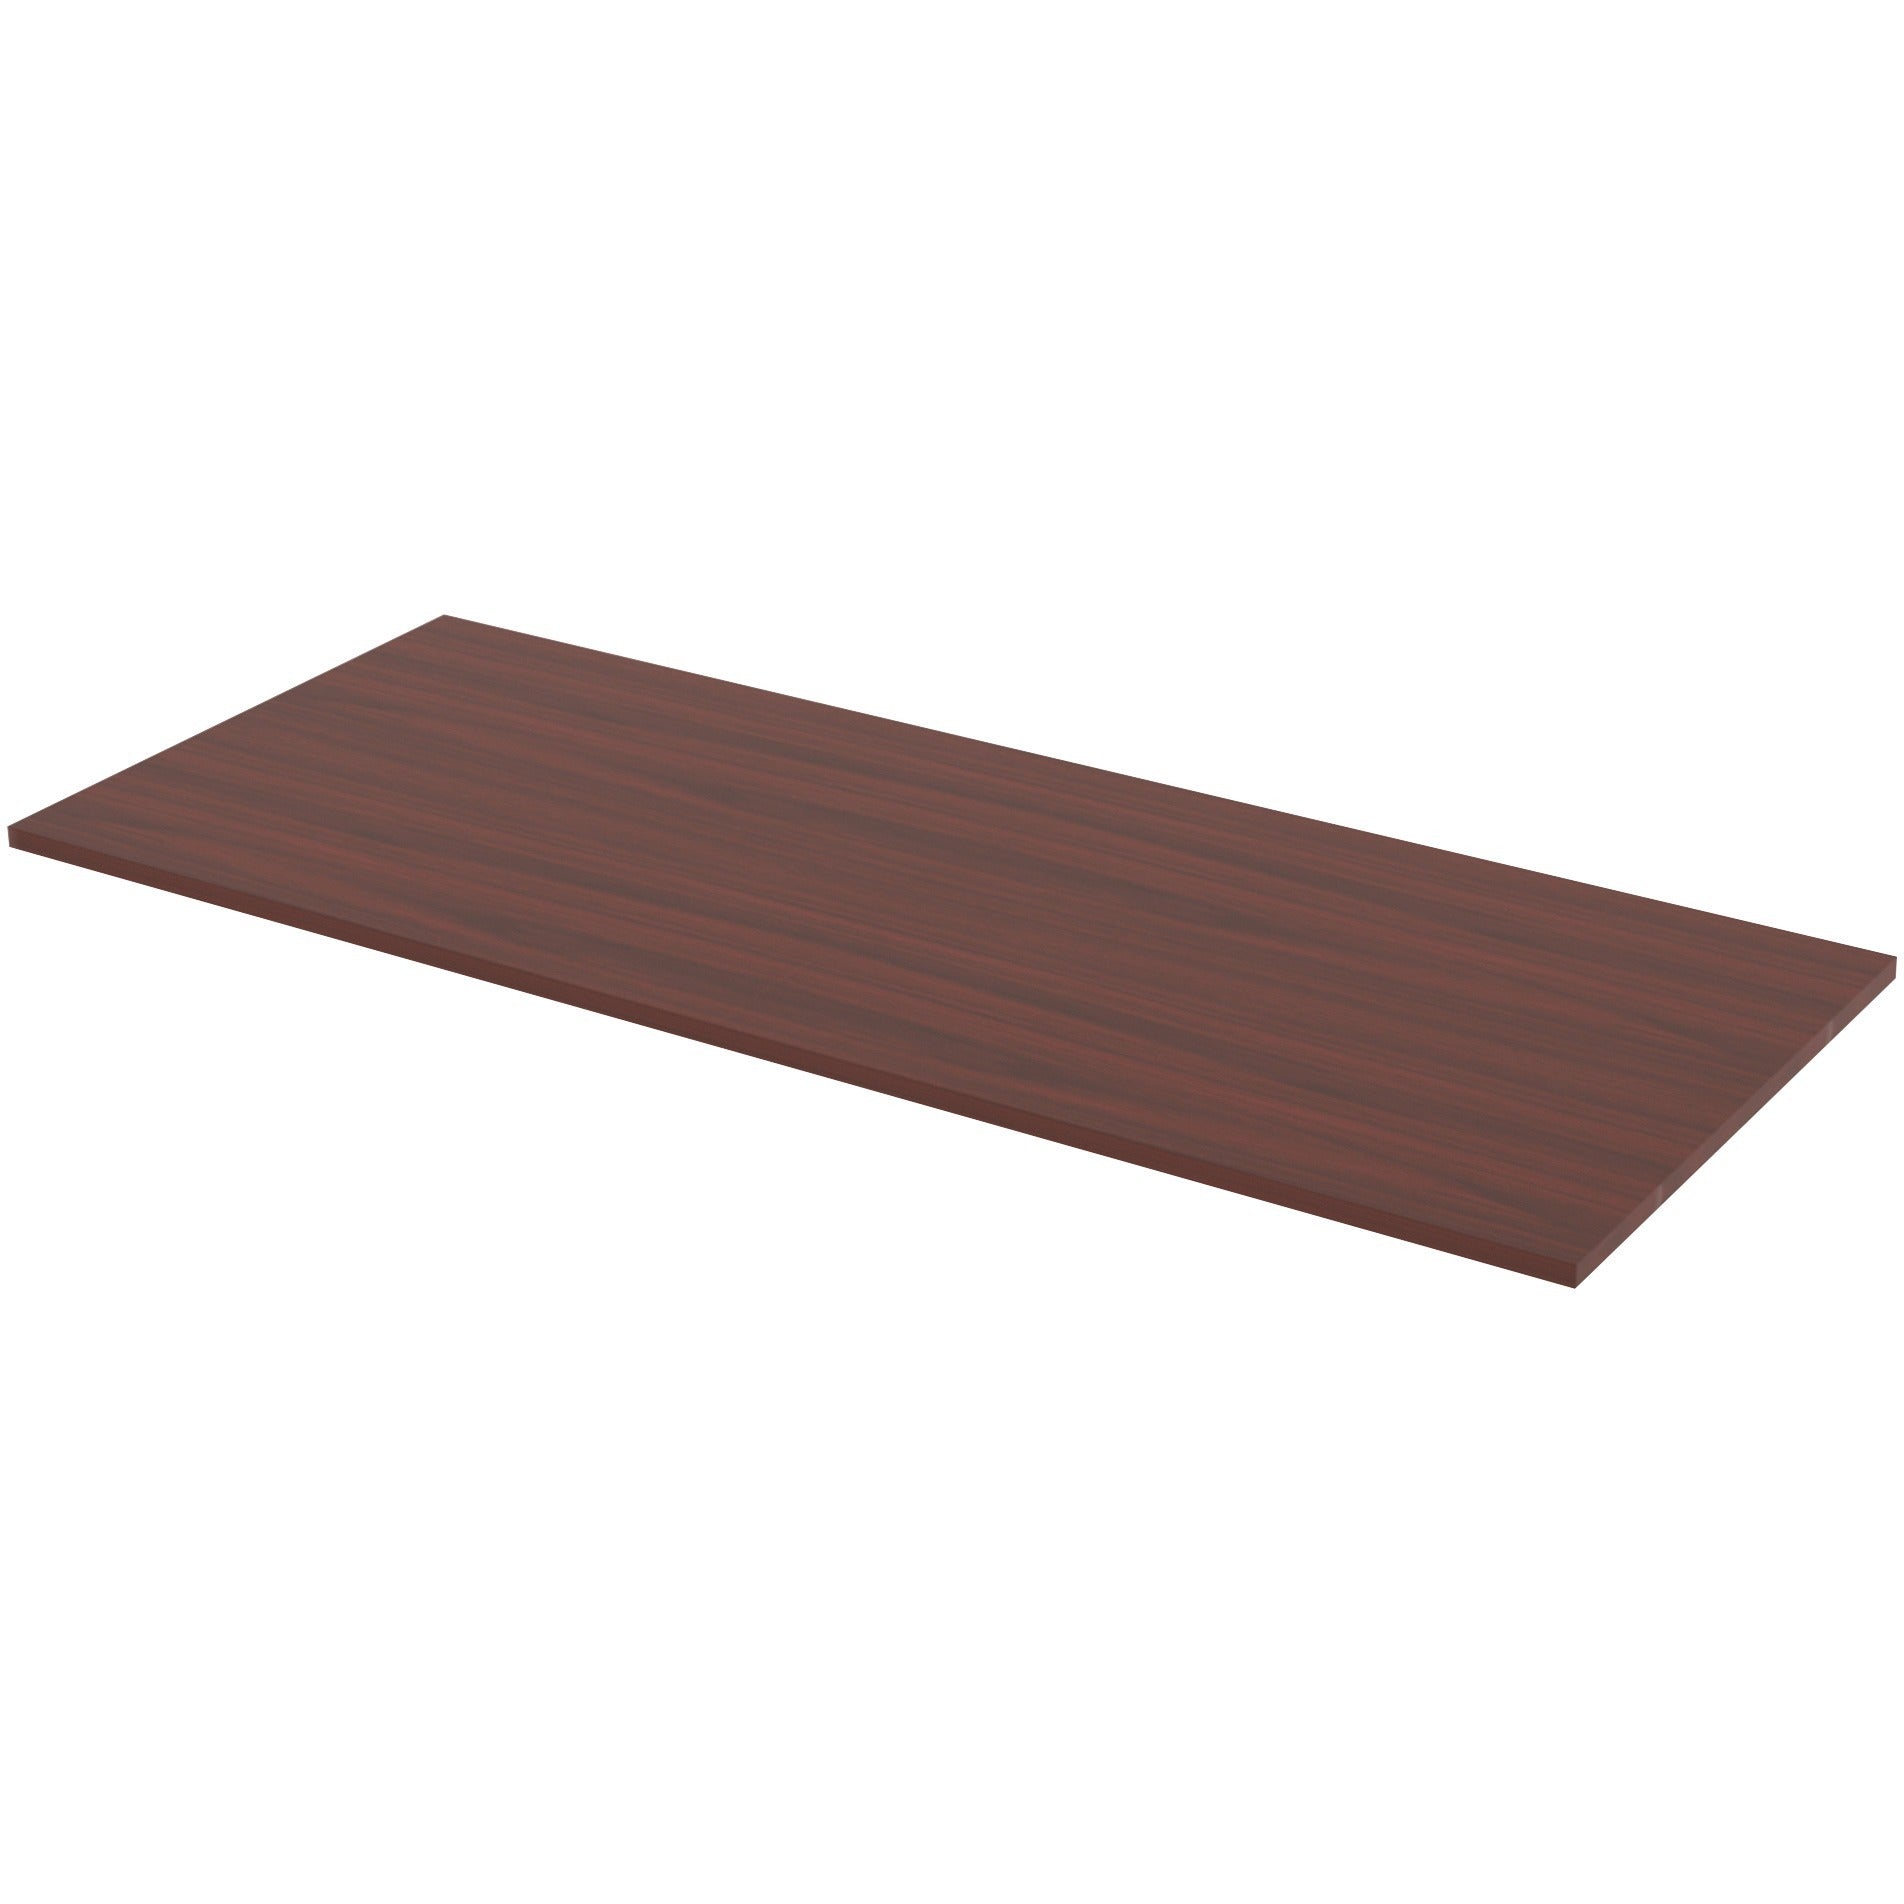 Lorell Relevance Series Tabletop - For - Table TopLaminated Rectangle, Mahogany Top - Contemporary Style x 60" Table Top Width x 24" Table Top Depth x 1" Table Top Thickness x 59.88" Width x 23.63" Depth - Assembly Required - 1 Each - 